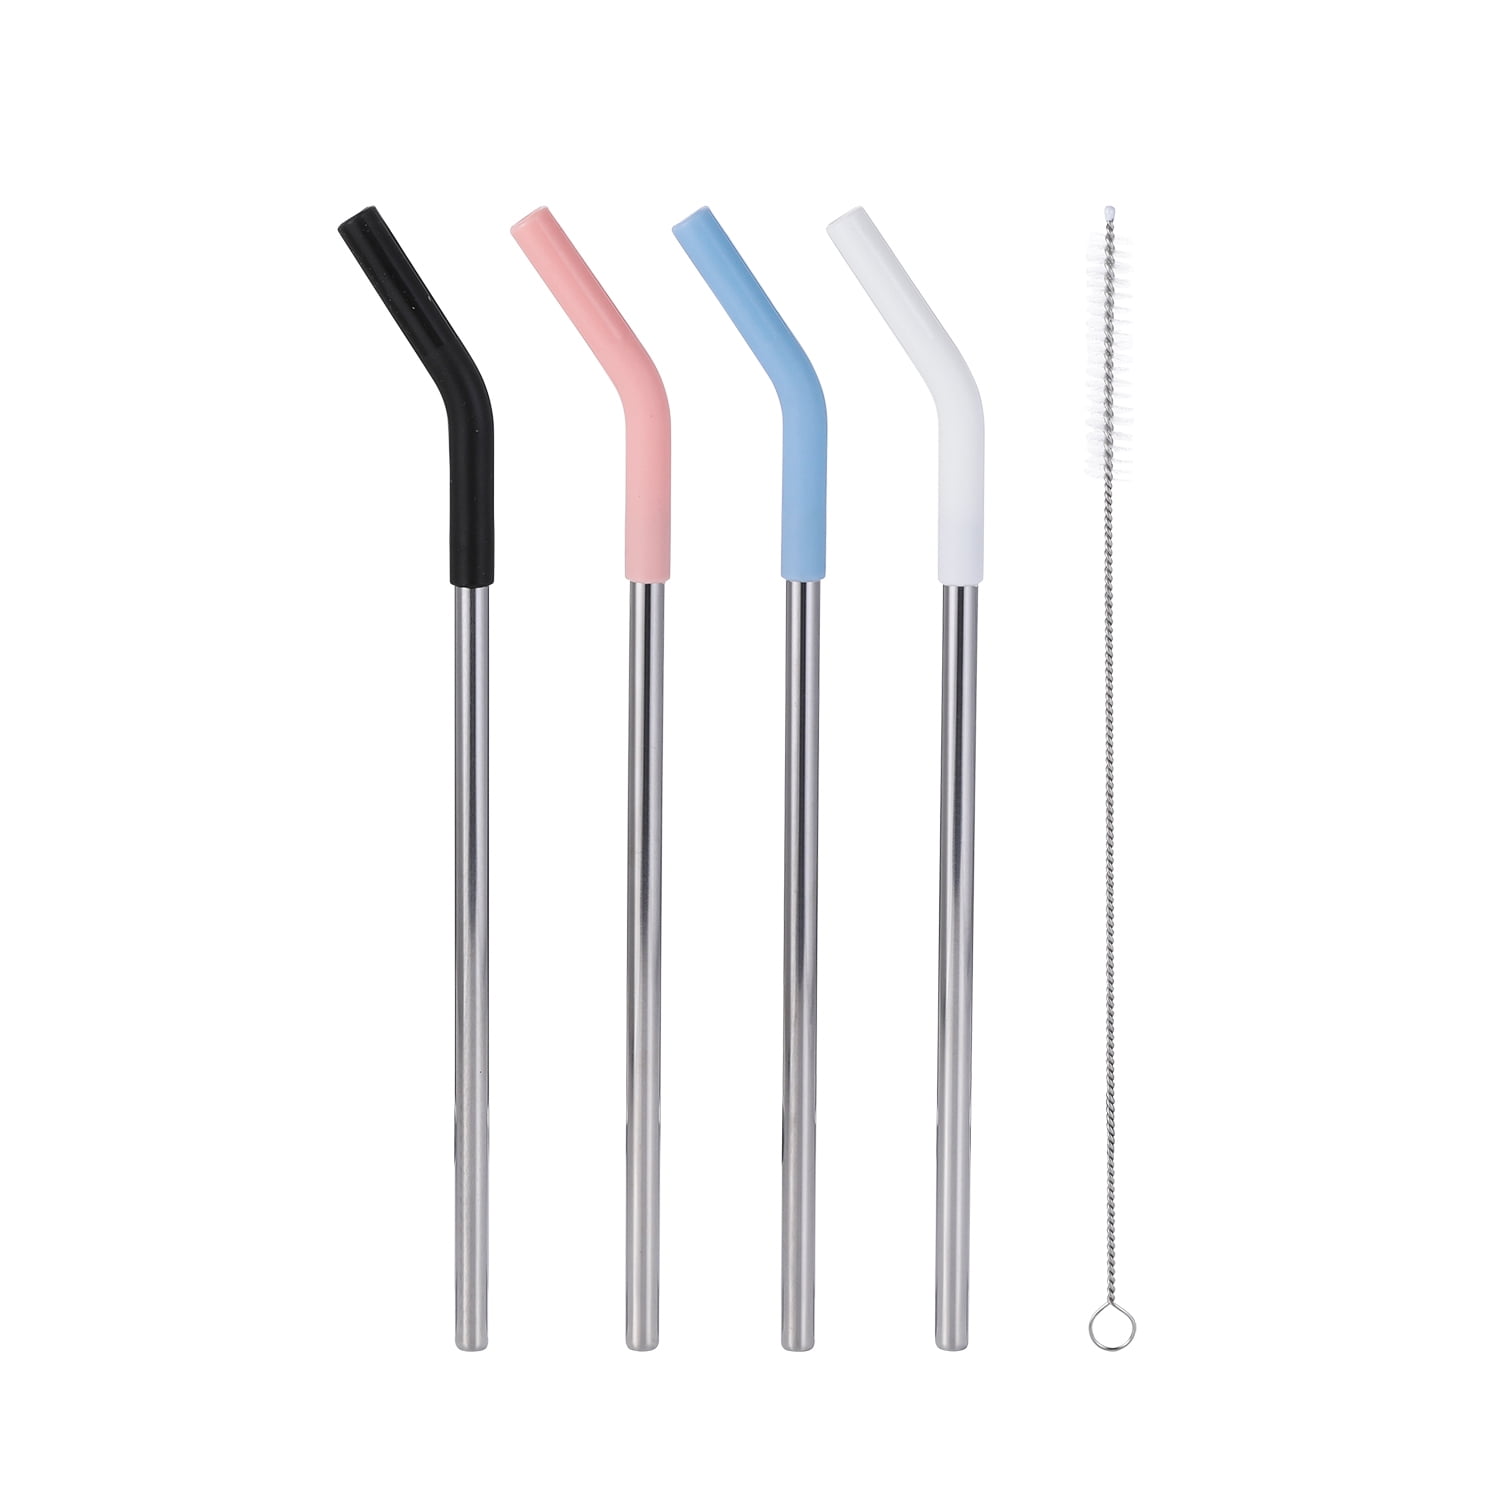 Jumbo Stainless Steel Bendable Straws 14 inch Pack of 5 : large bendable metal  straws